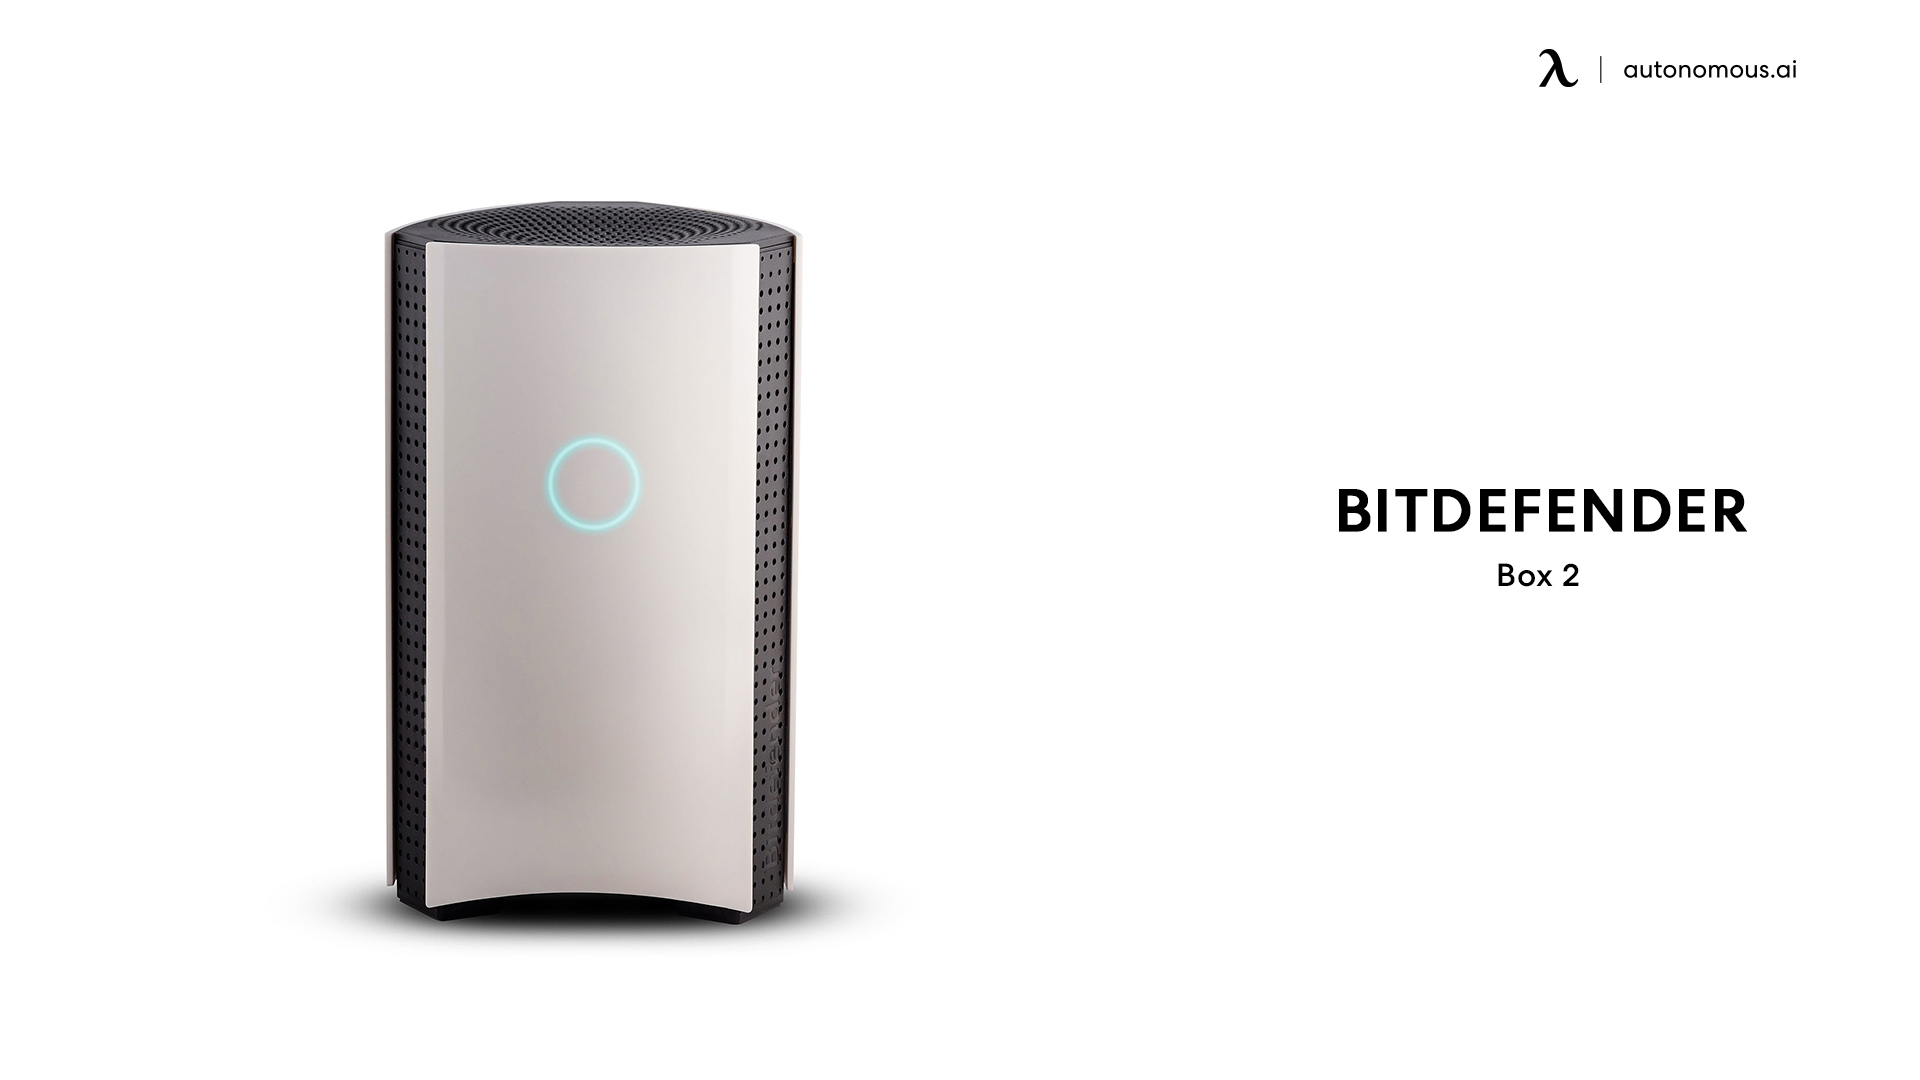 Box 2 from Bitdefender home network security devices